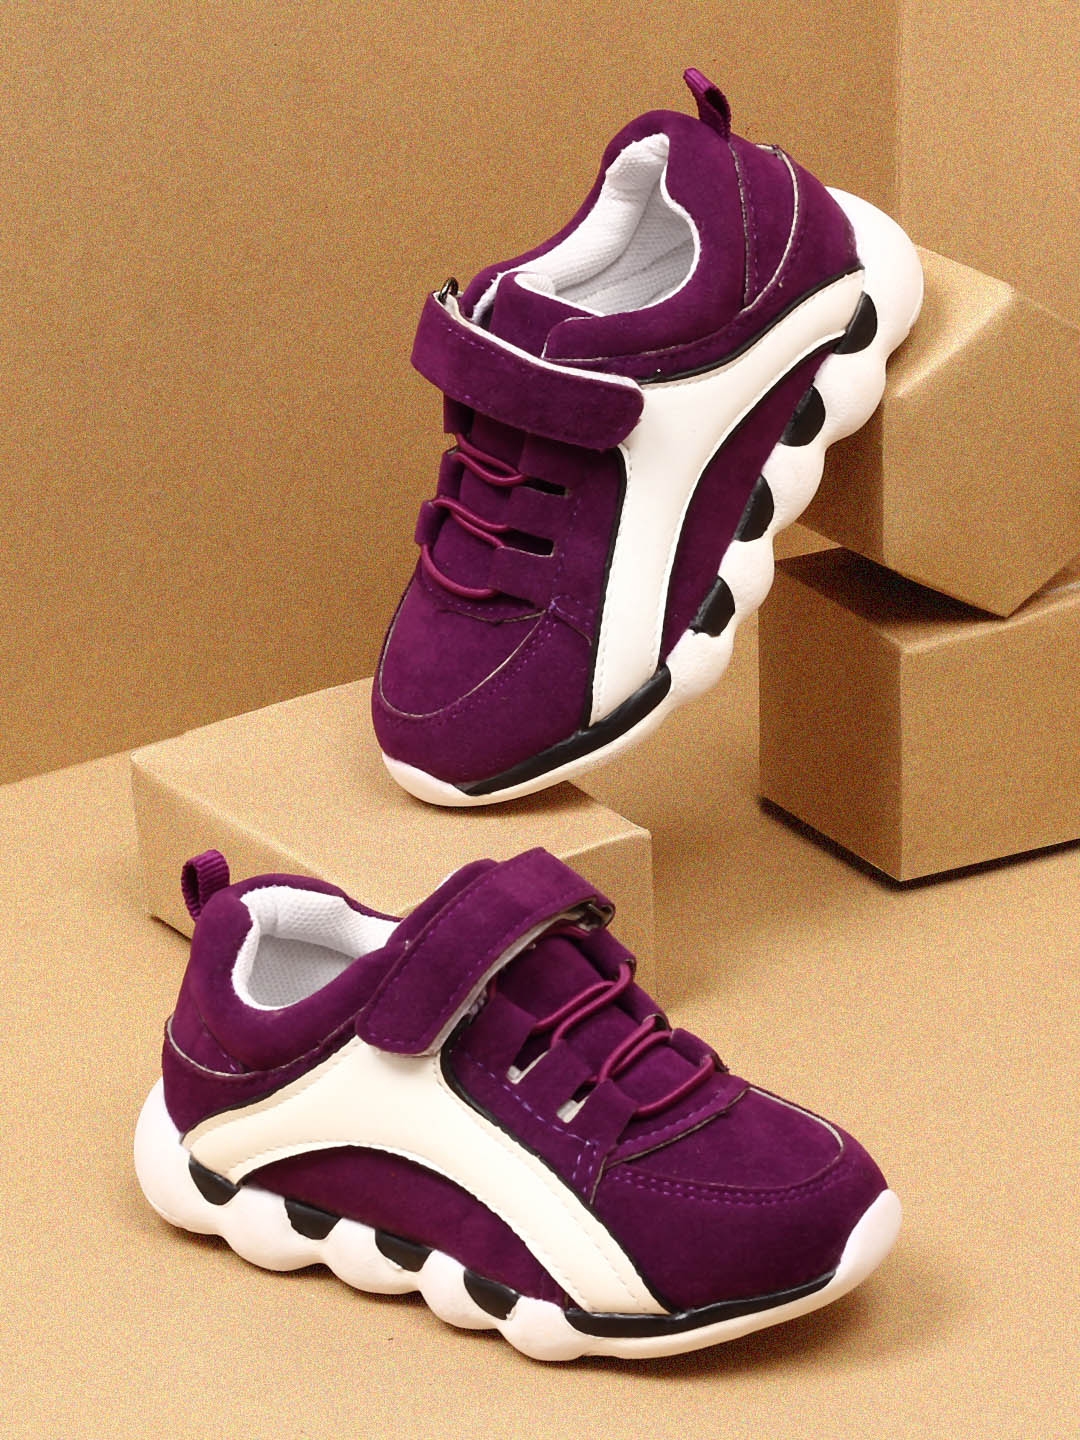 sneakers purple shoes unisex casual